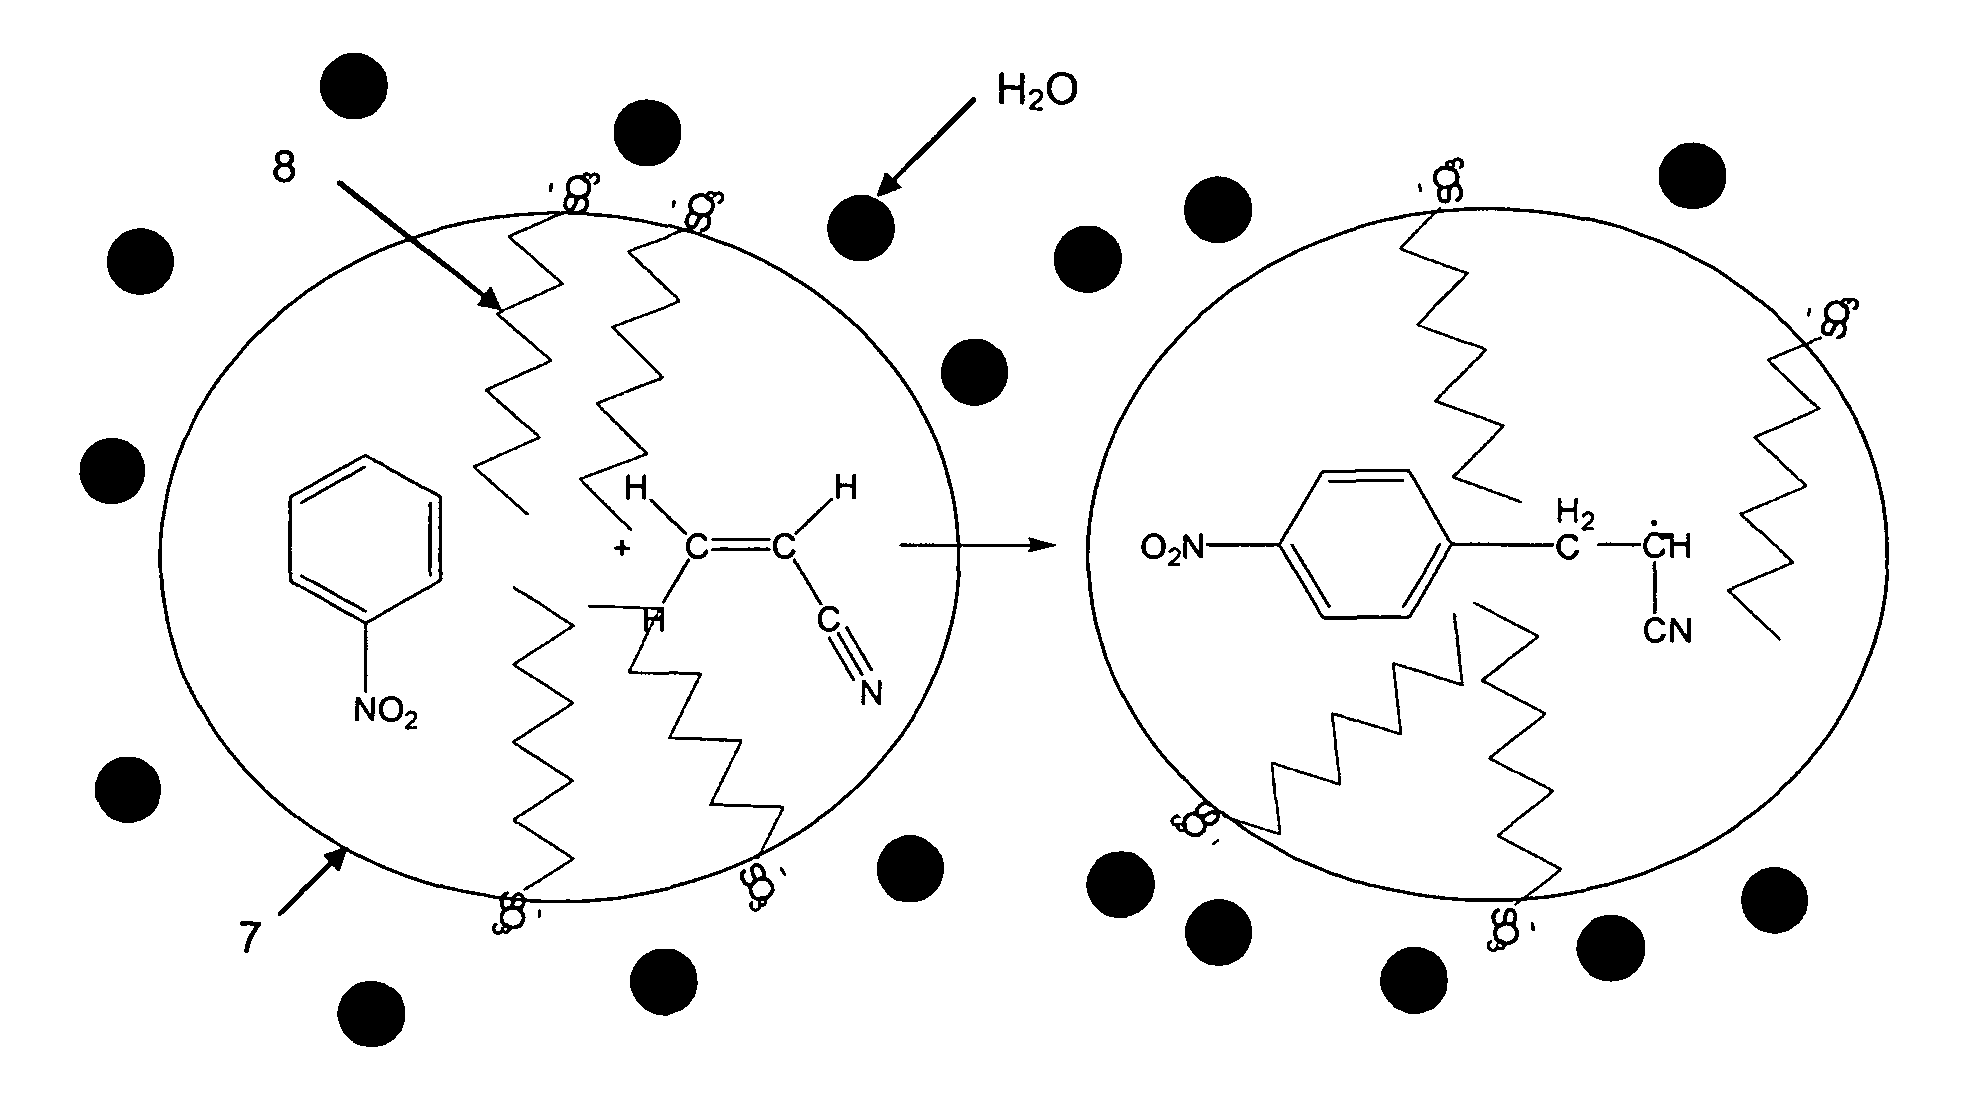 Process for forming organic films on electrically conductive or semi-conductive surfaces using aqueous solutions